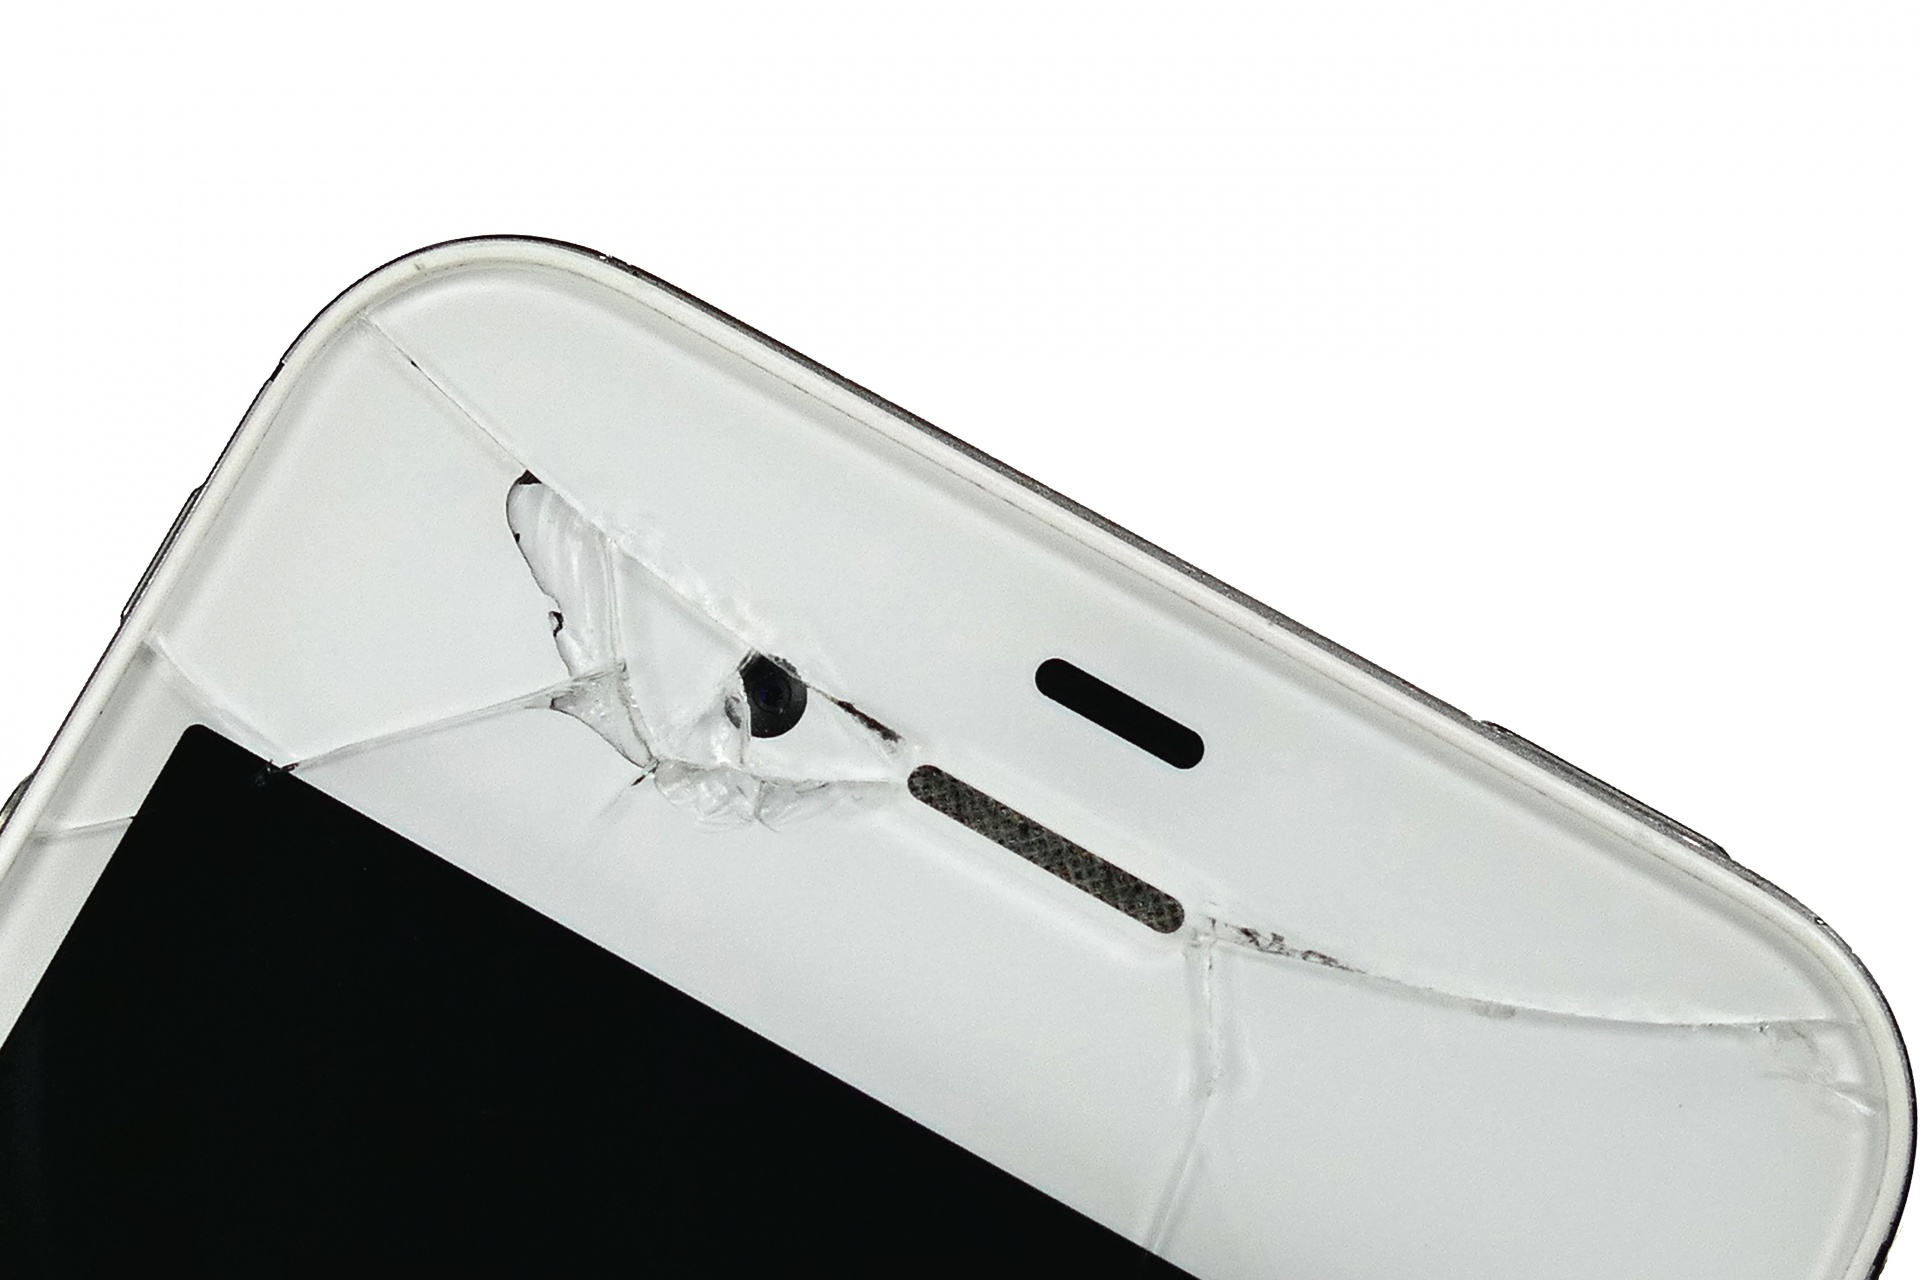 A mobile phone with a cracked screen.